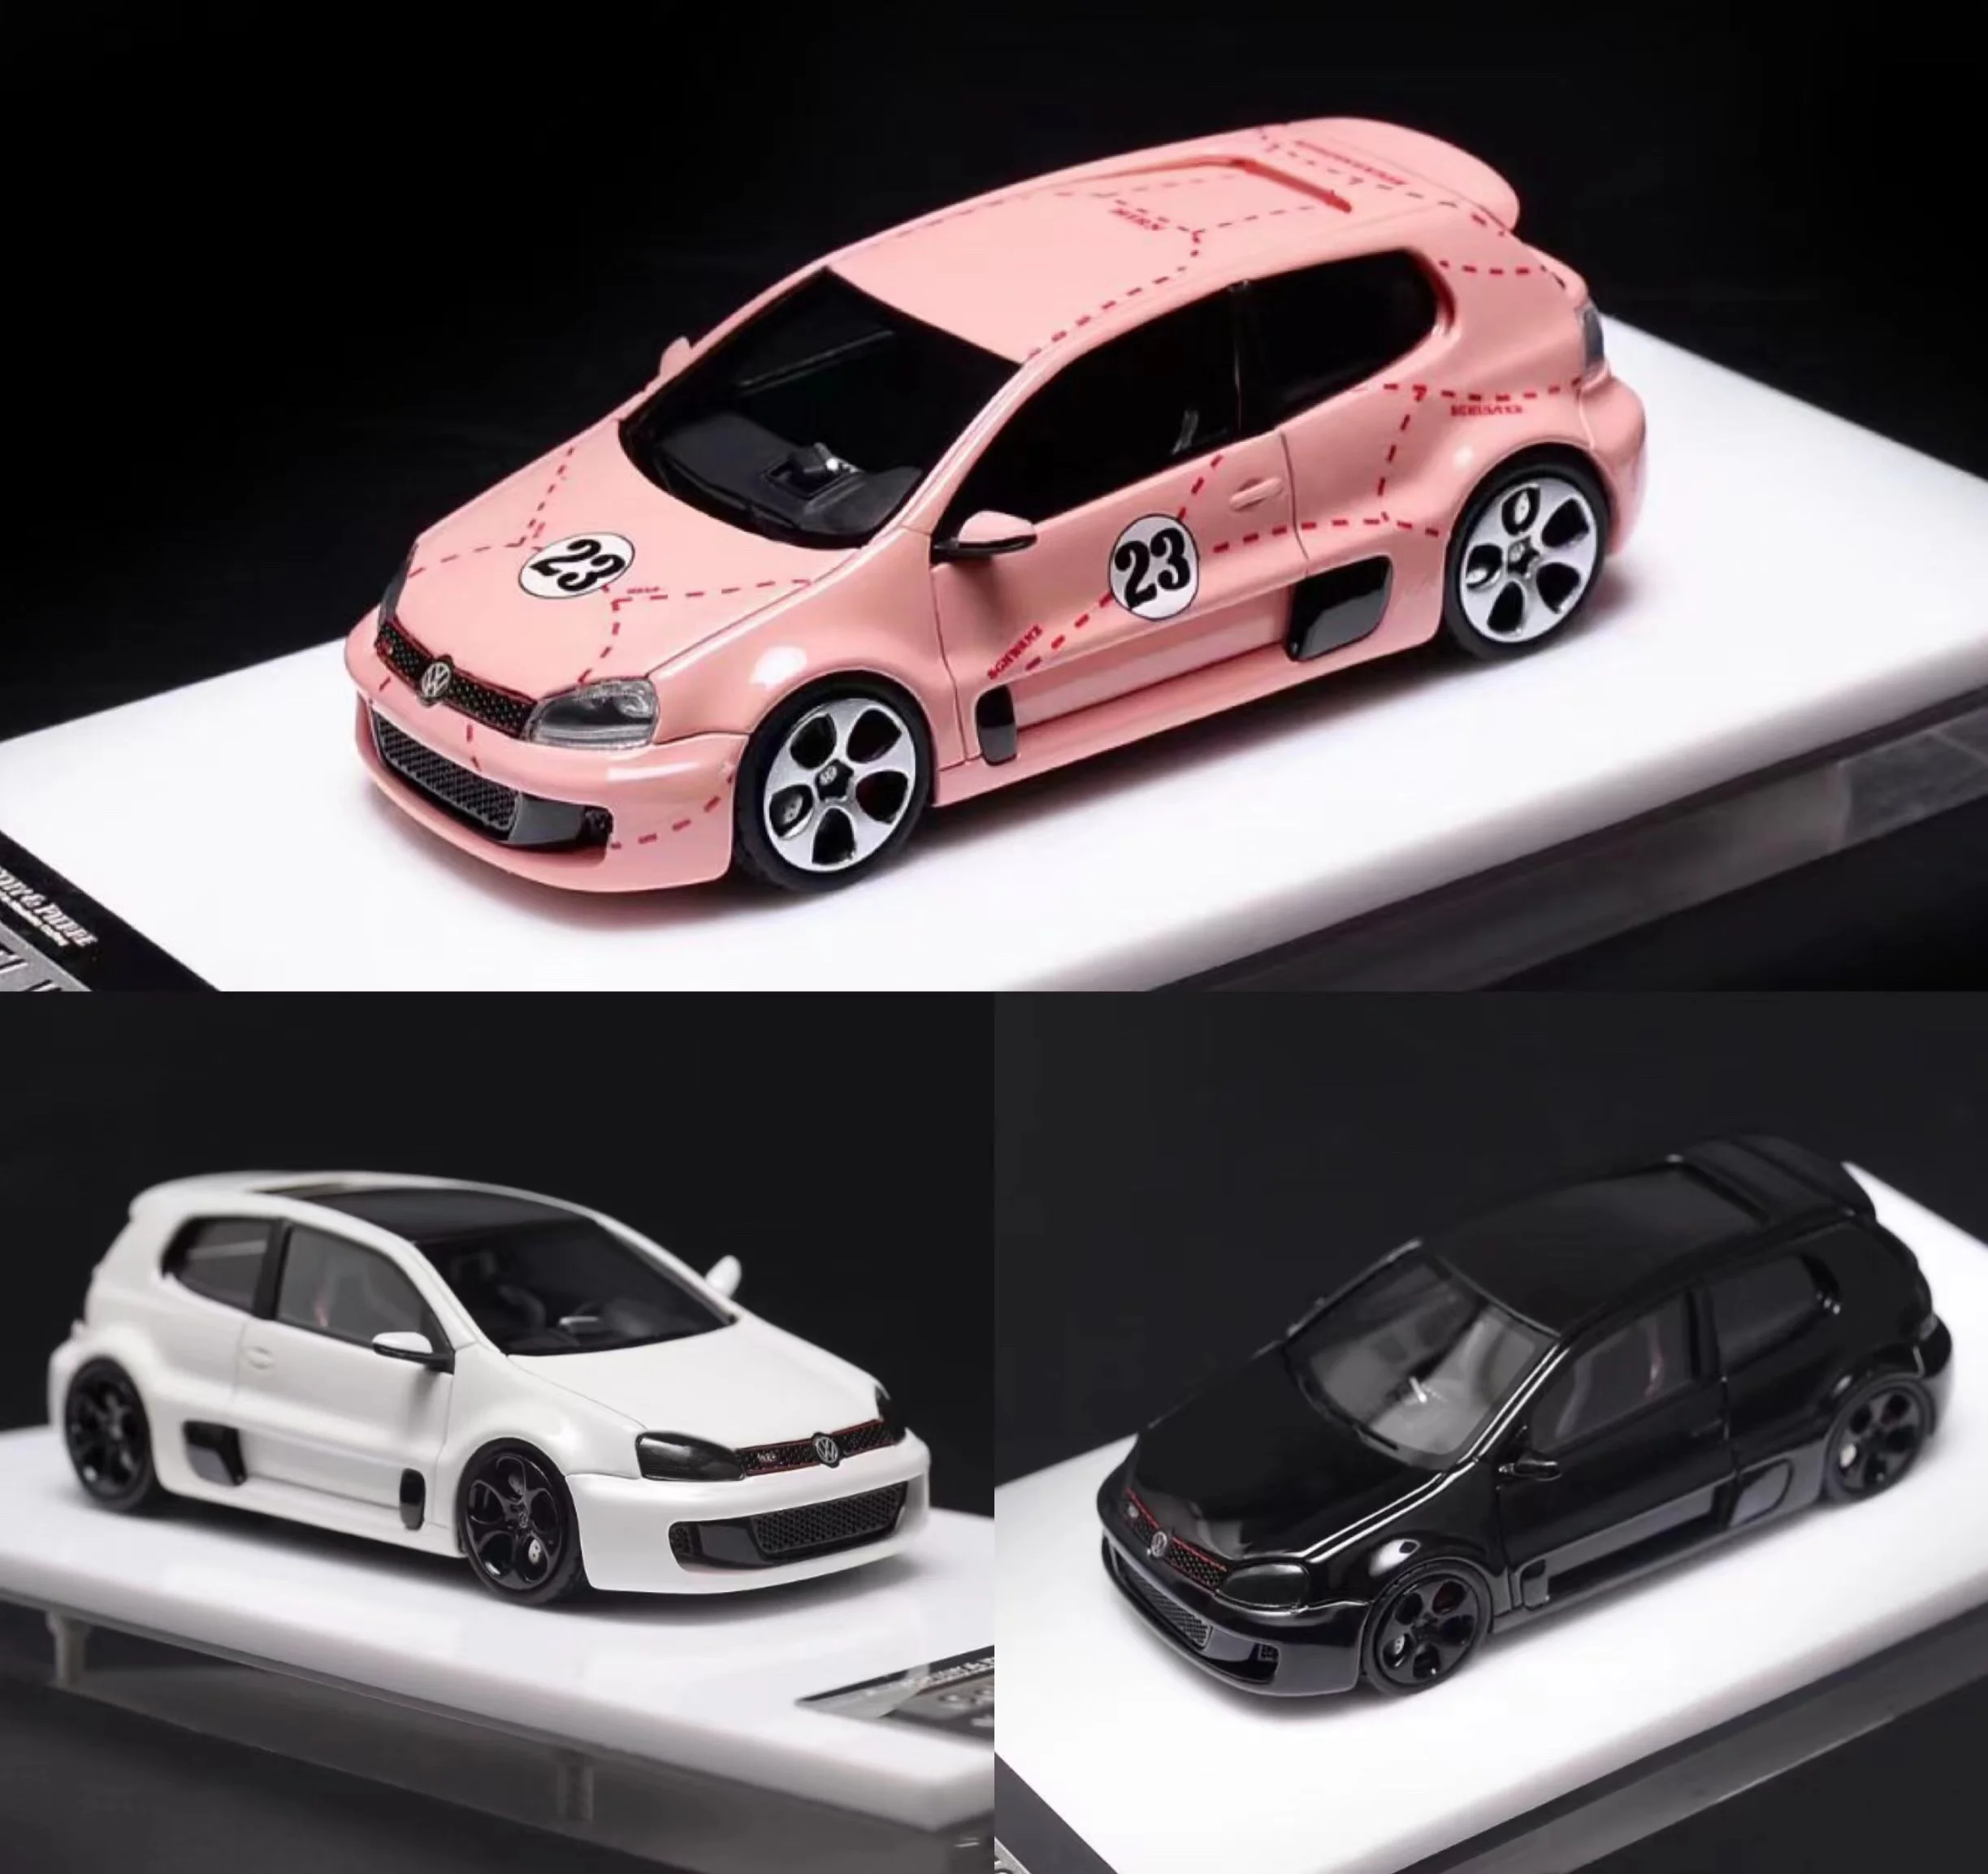 

TP Timothy&Pierre 1/64 Volkswagen Golf GTI W12 650 Concept Car Model Collection Ornament Gift